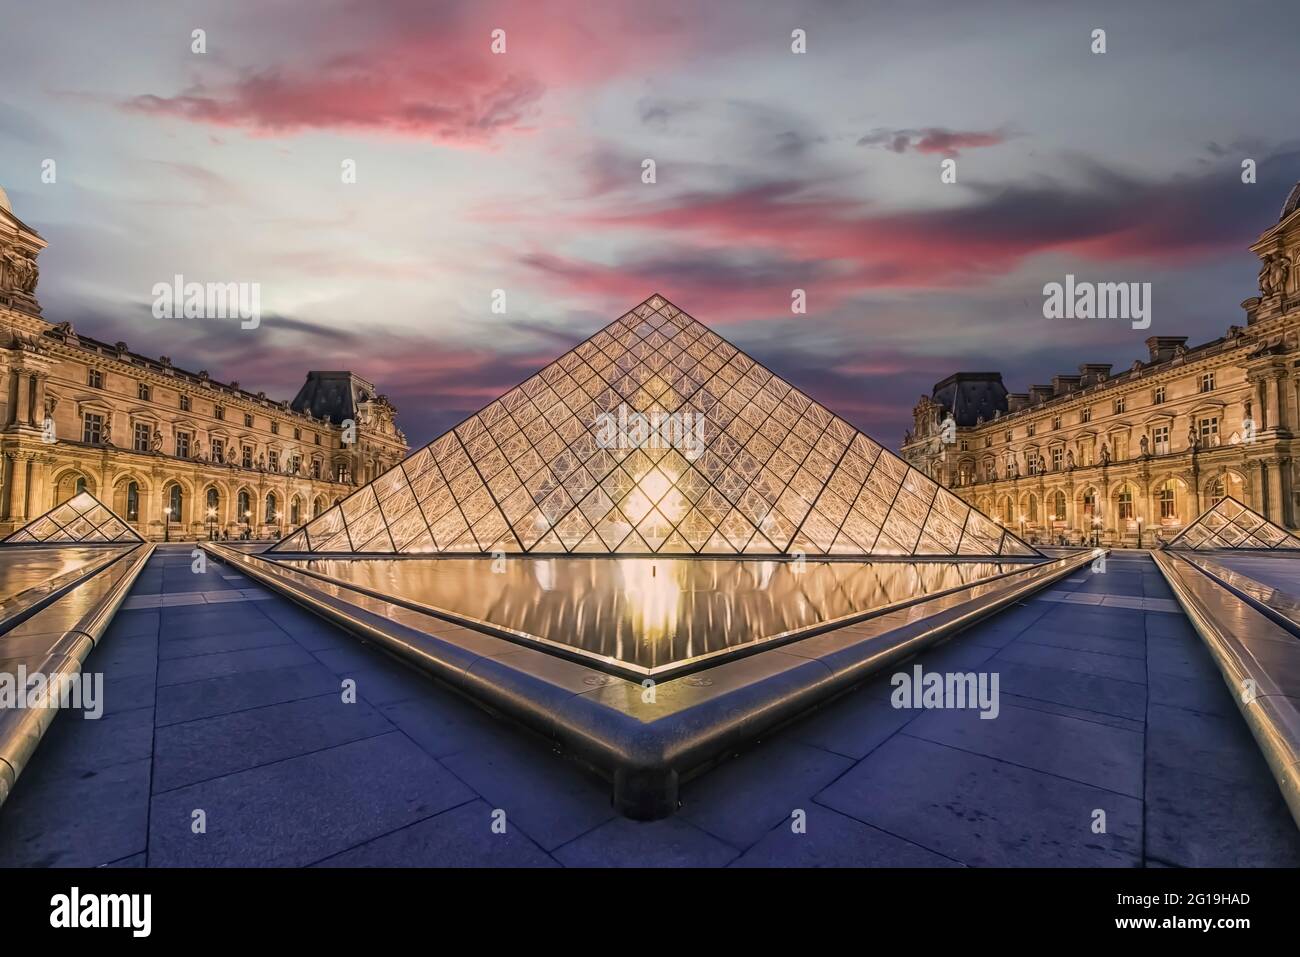 Louvre museum in the evening Stock Photo